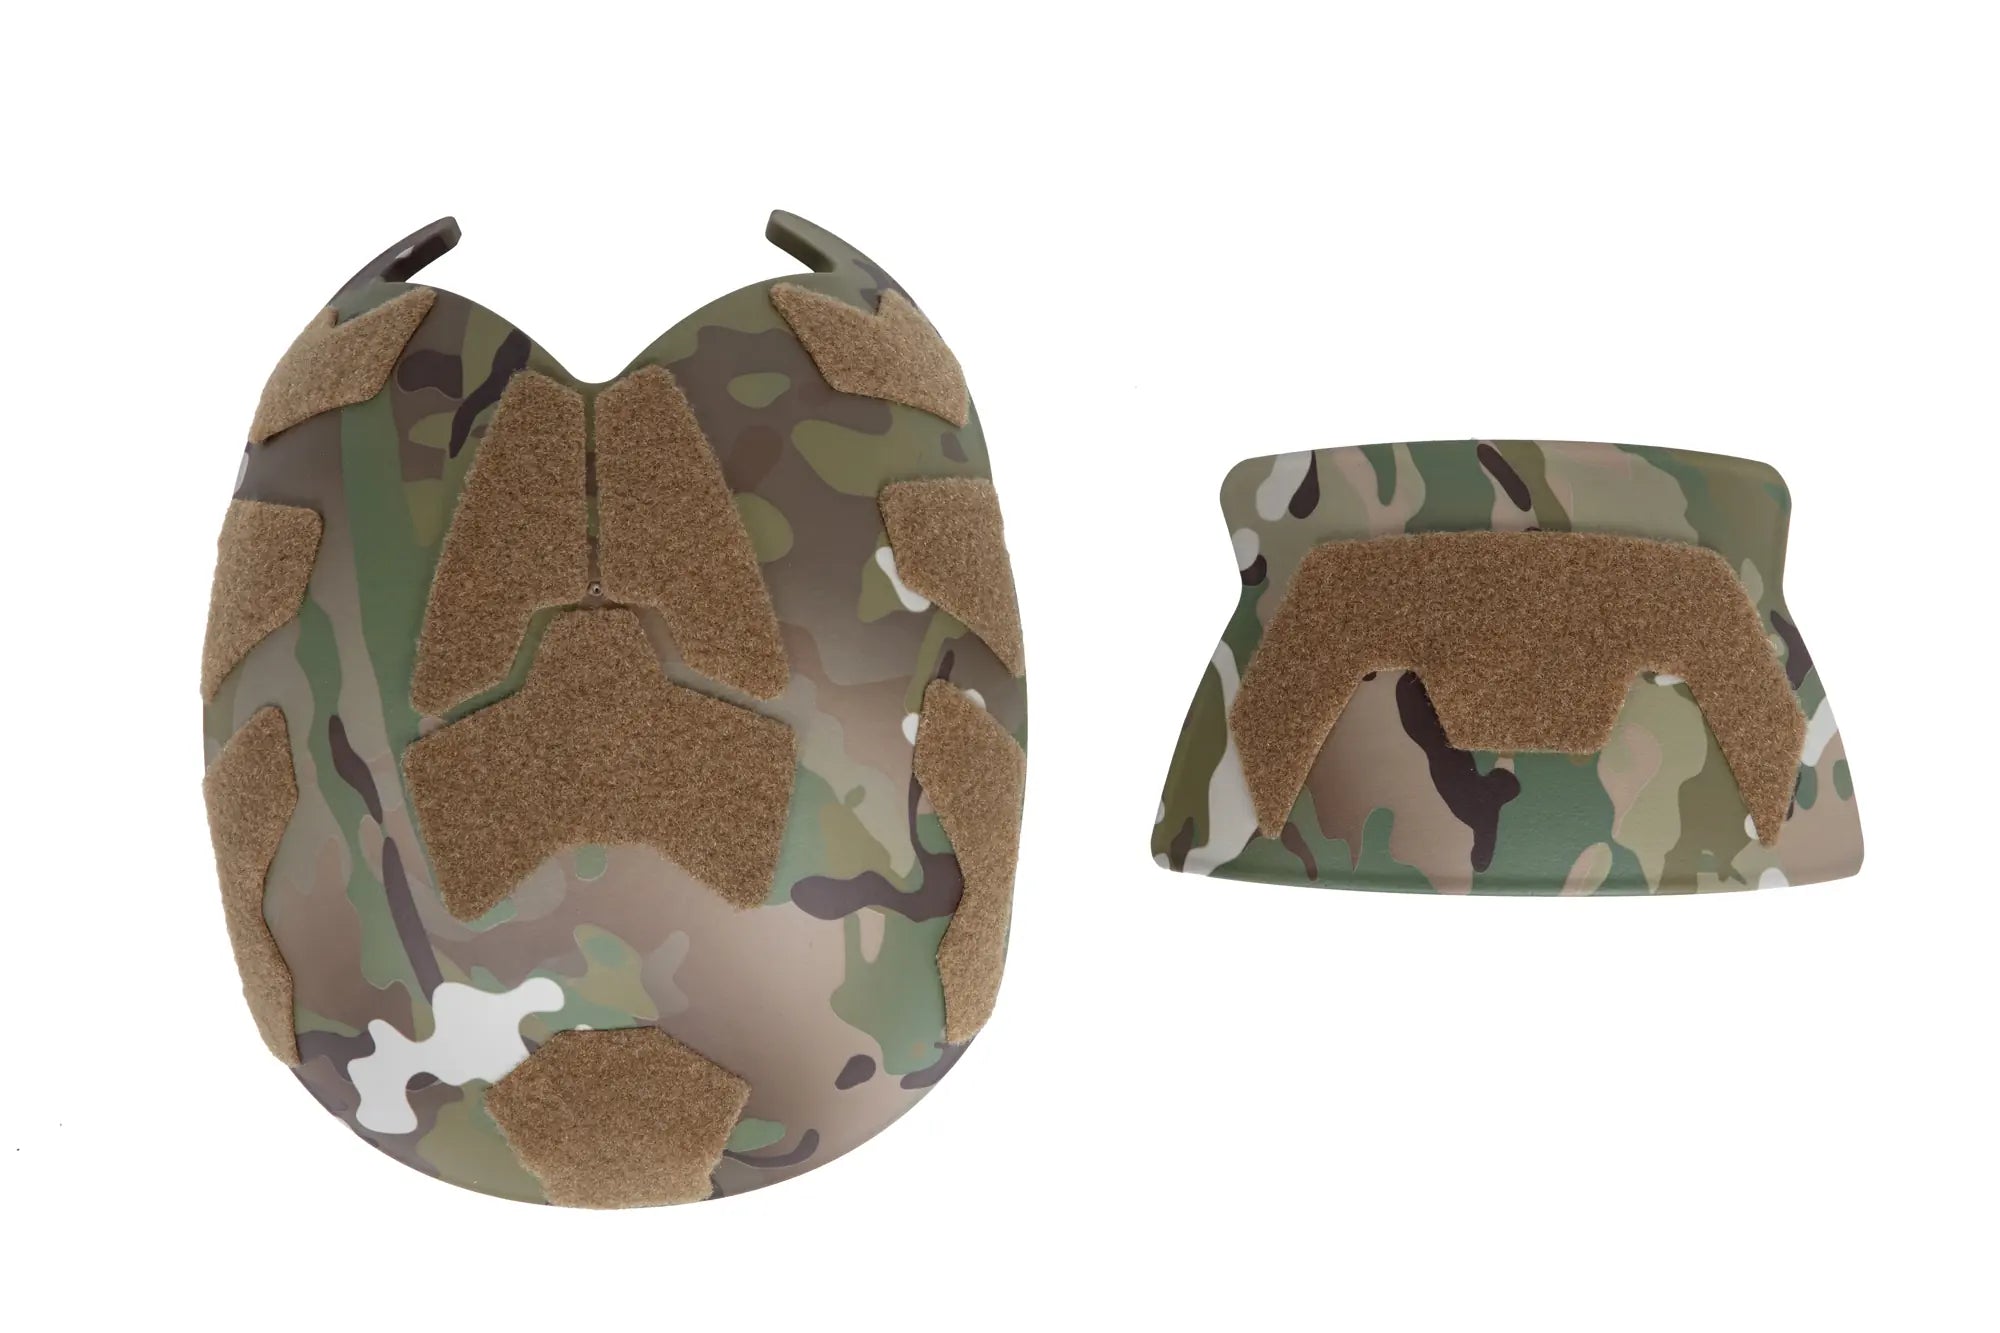 Protective plates for the Fast SF Wosport Multicam helmet